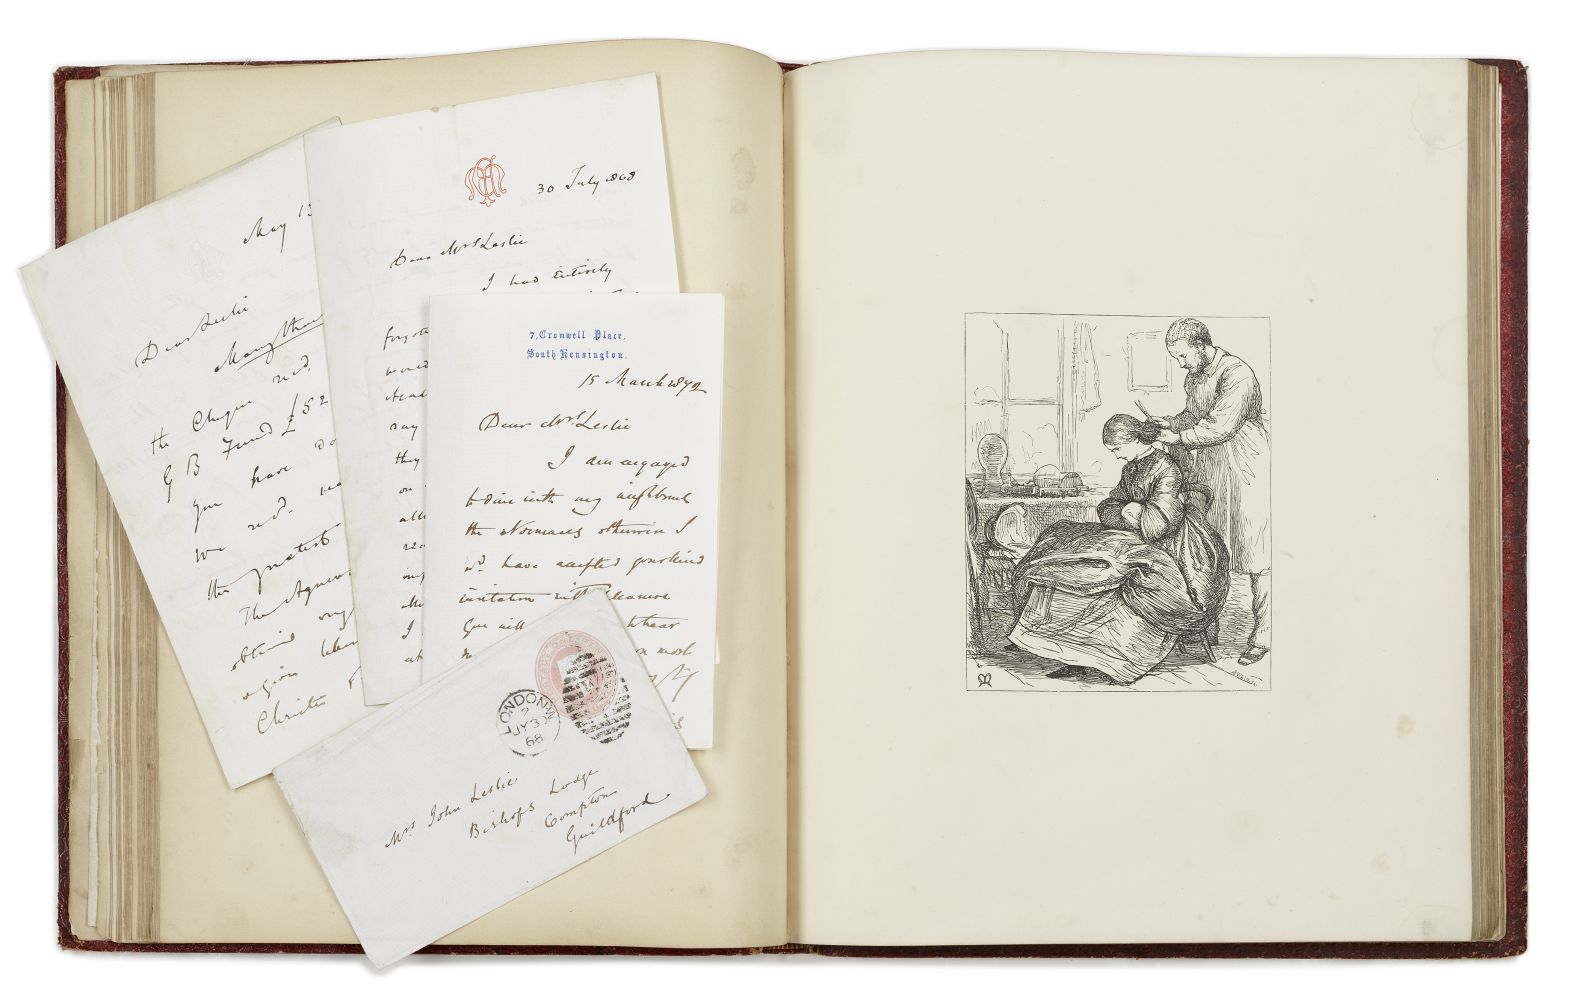 MILLAIS (JOHN) 'Woodcuts from Drawings by J.E. Millais', with 4 autograph letters signed from Mil...